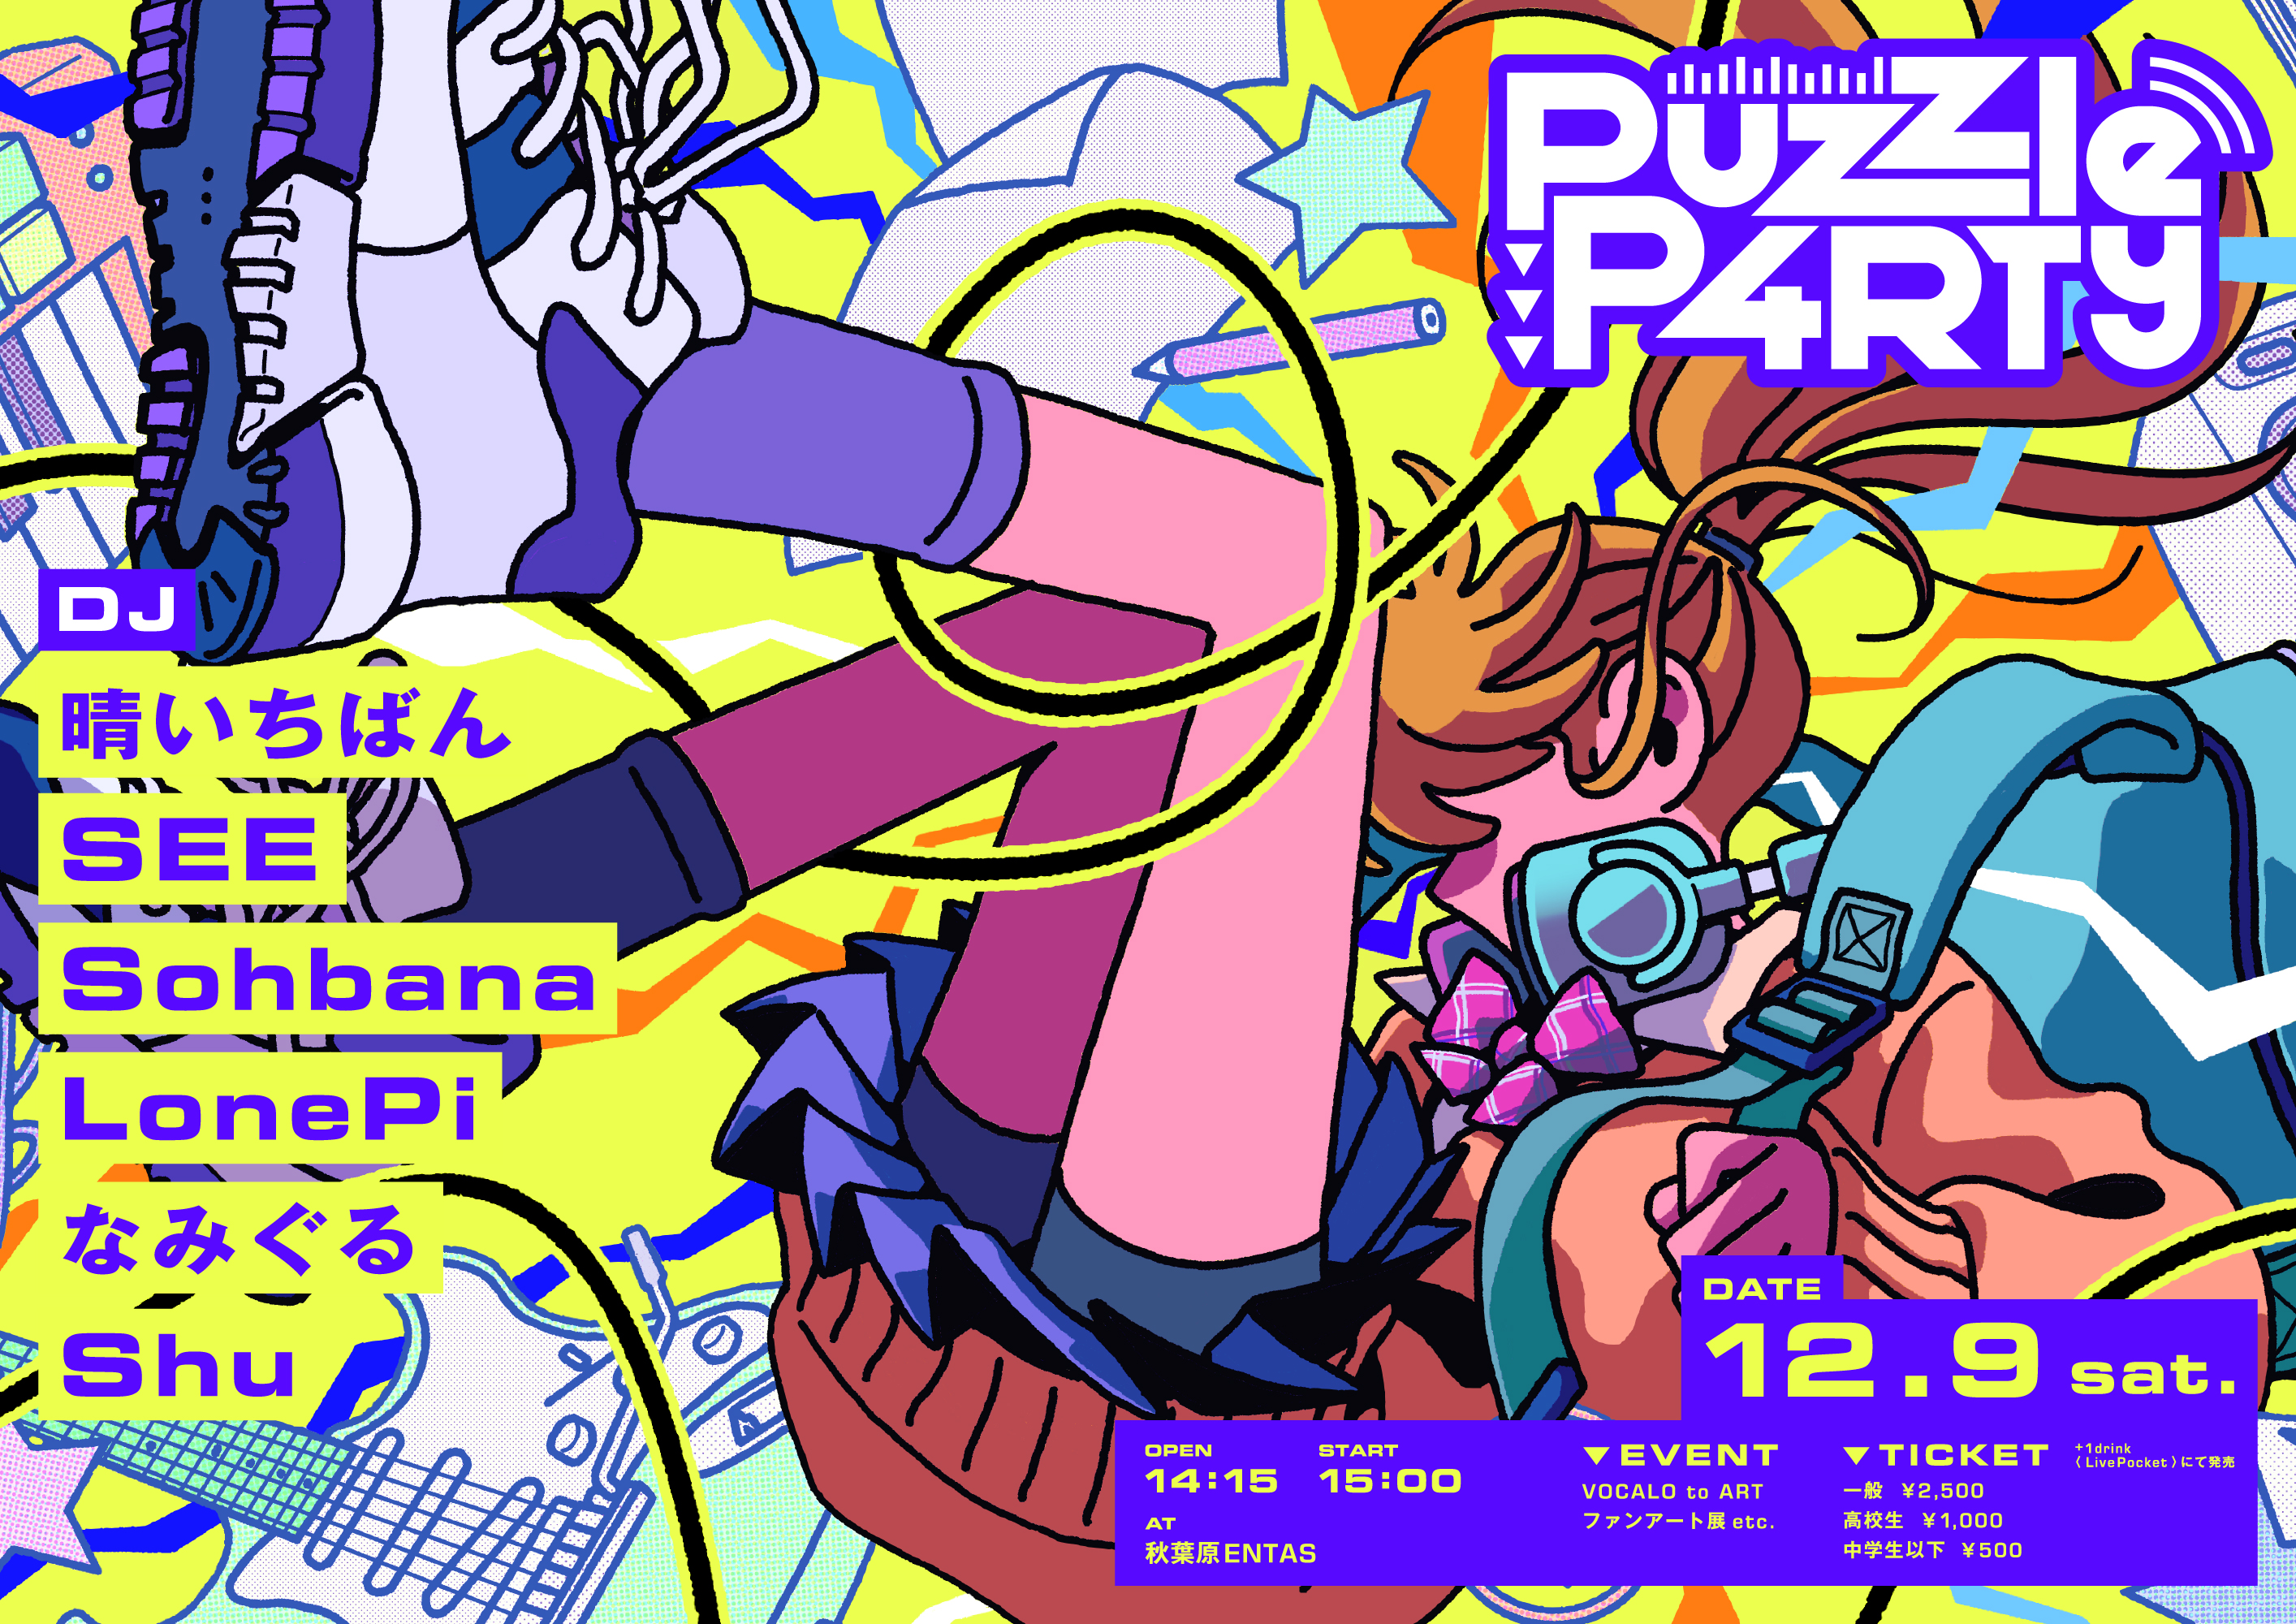 Puzzle Project 初のイベント「Puzzle P4RTY」開催決定！